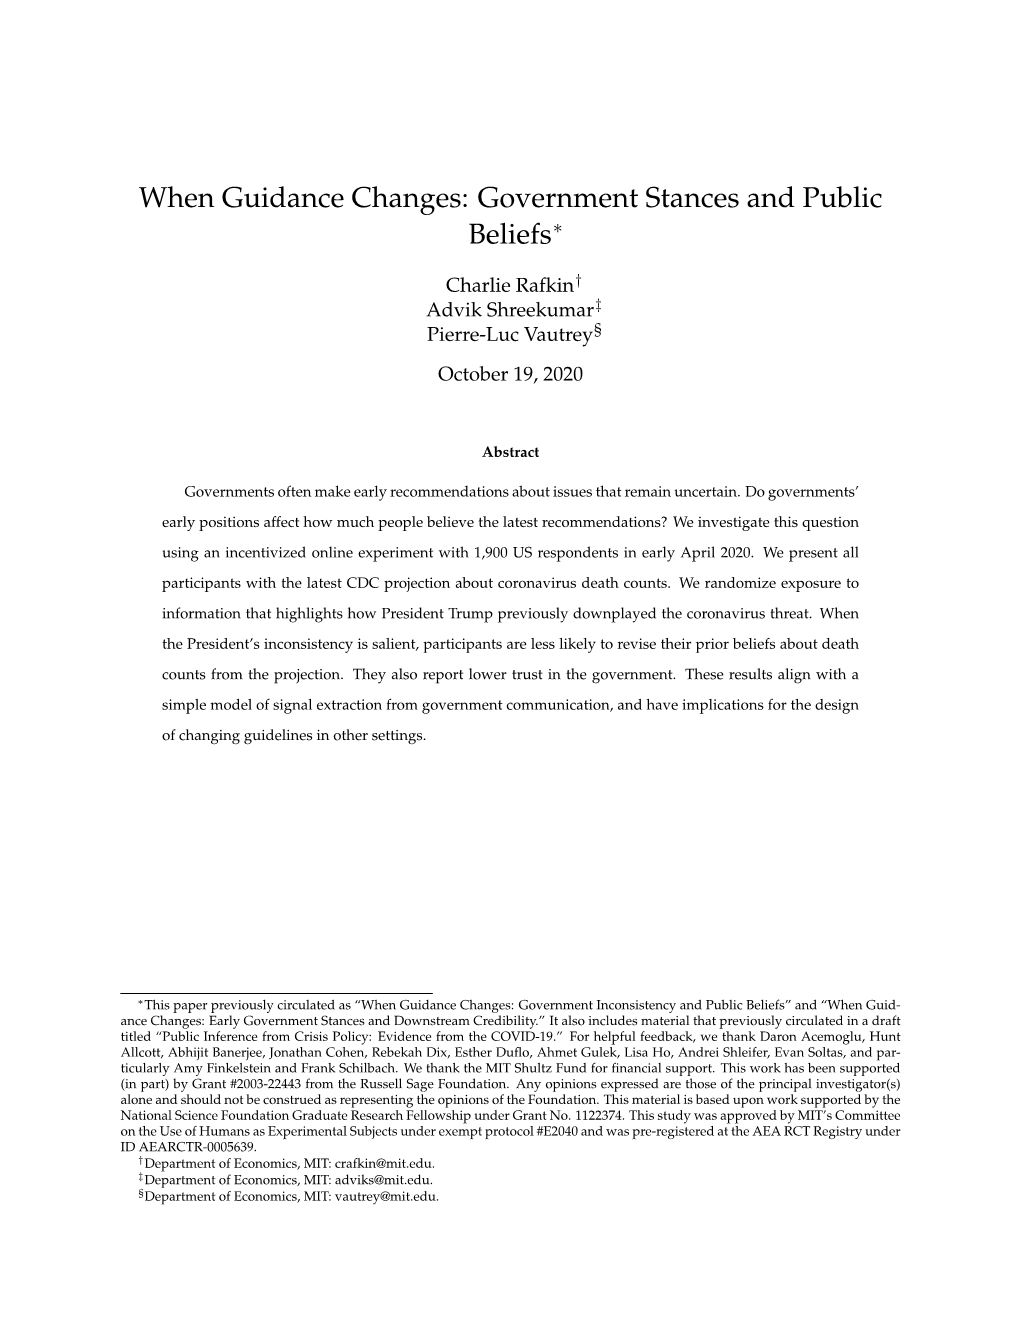 When Guidance Changes: Government Stances and Public Beliefs∗